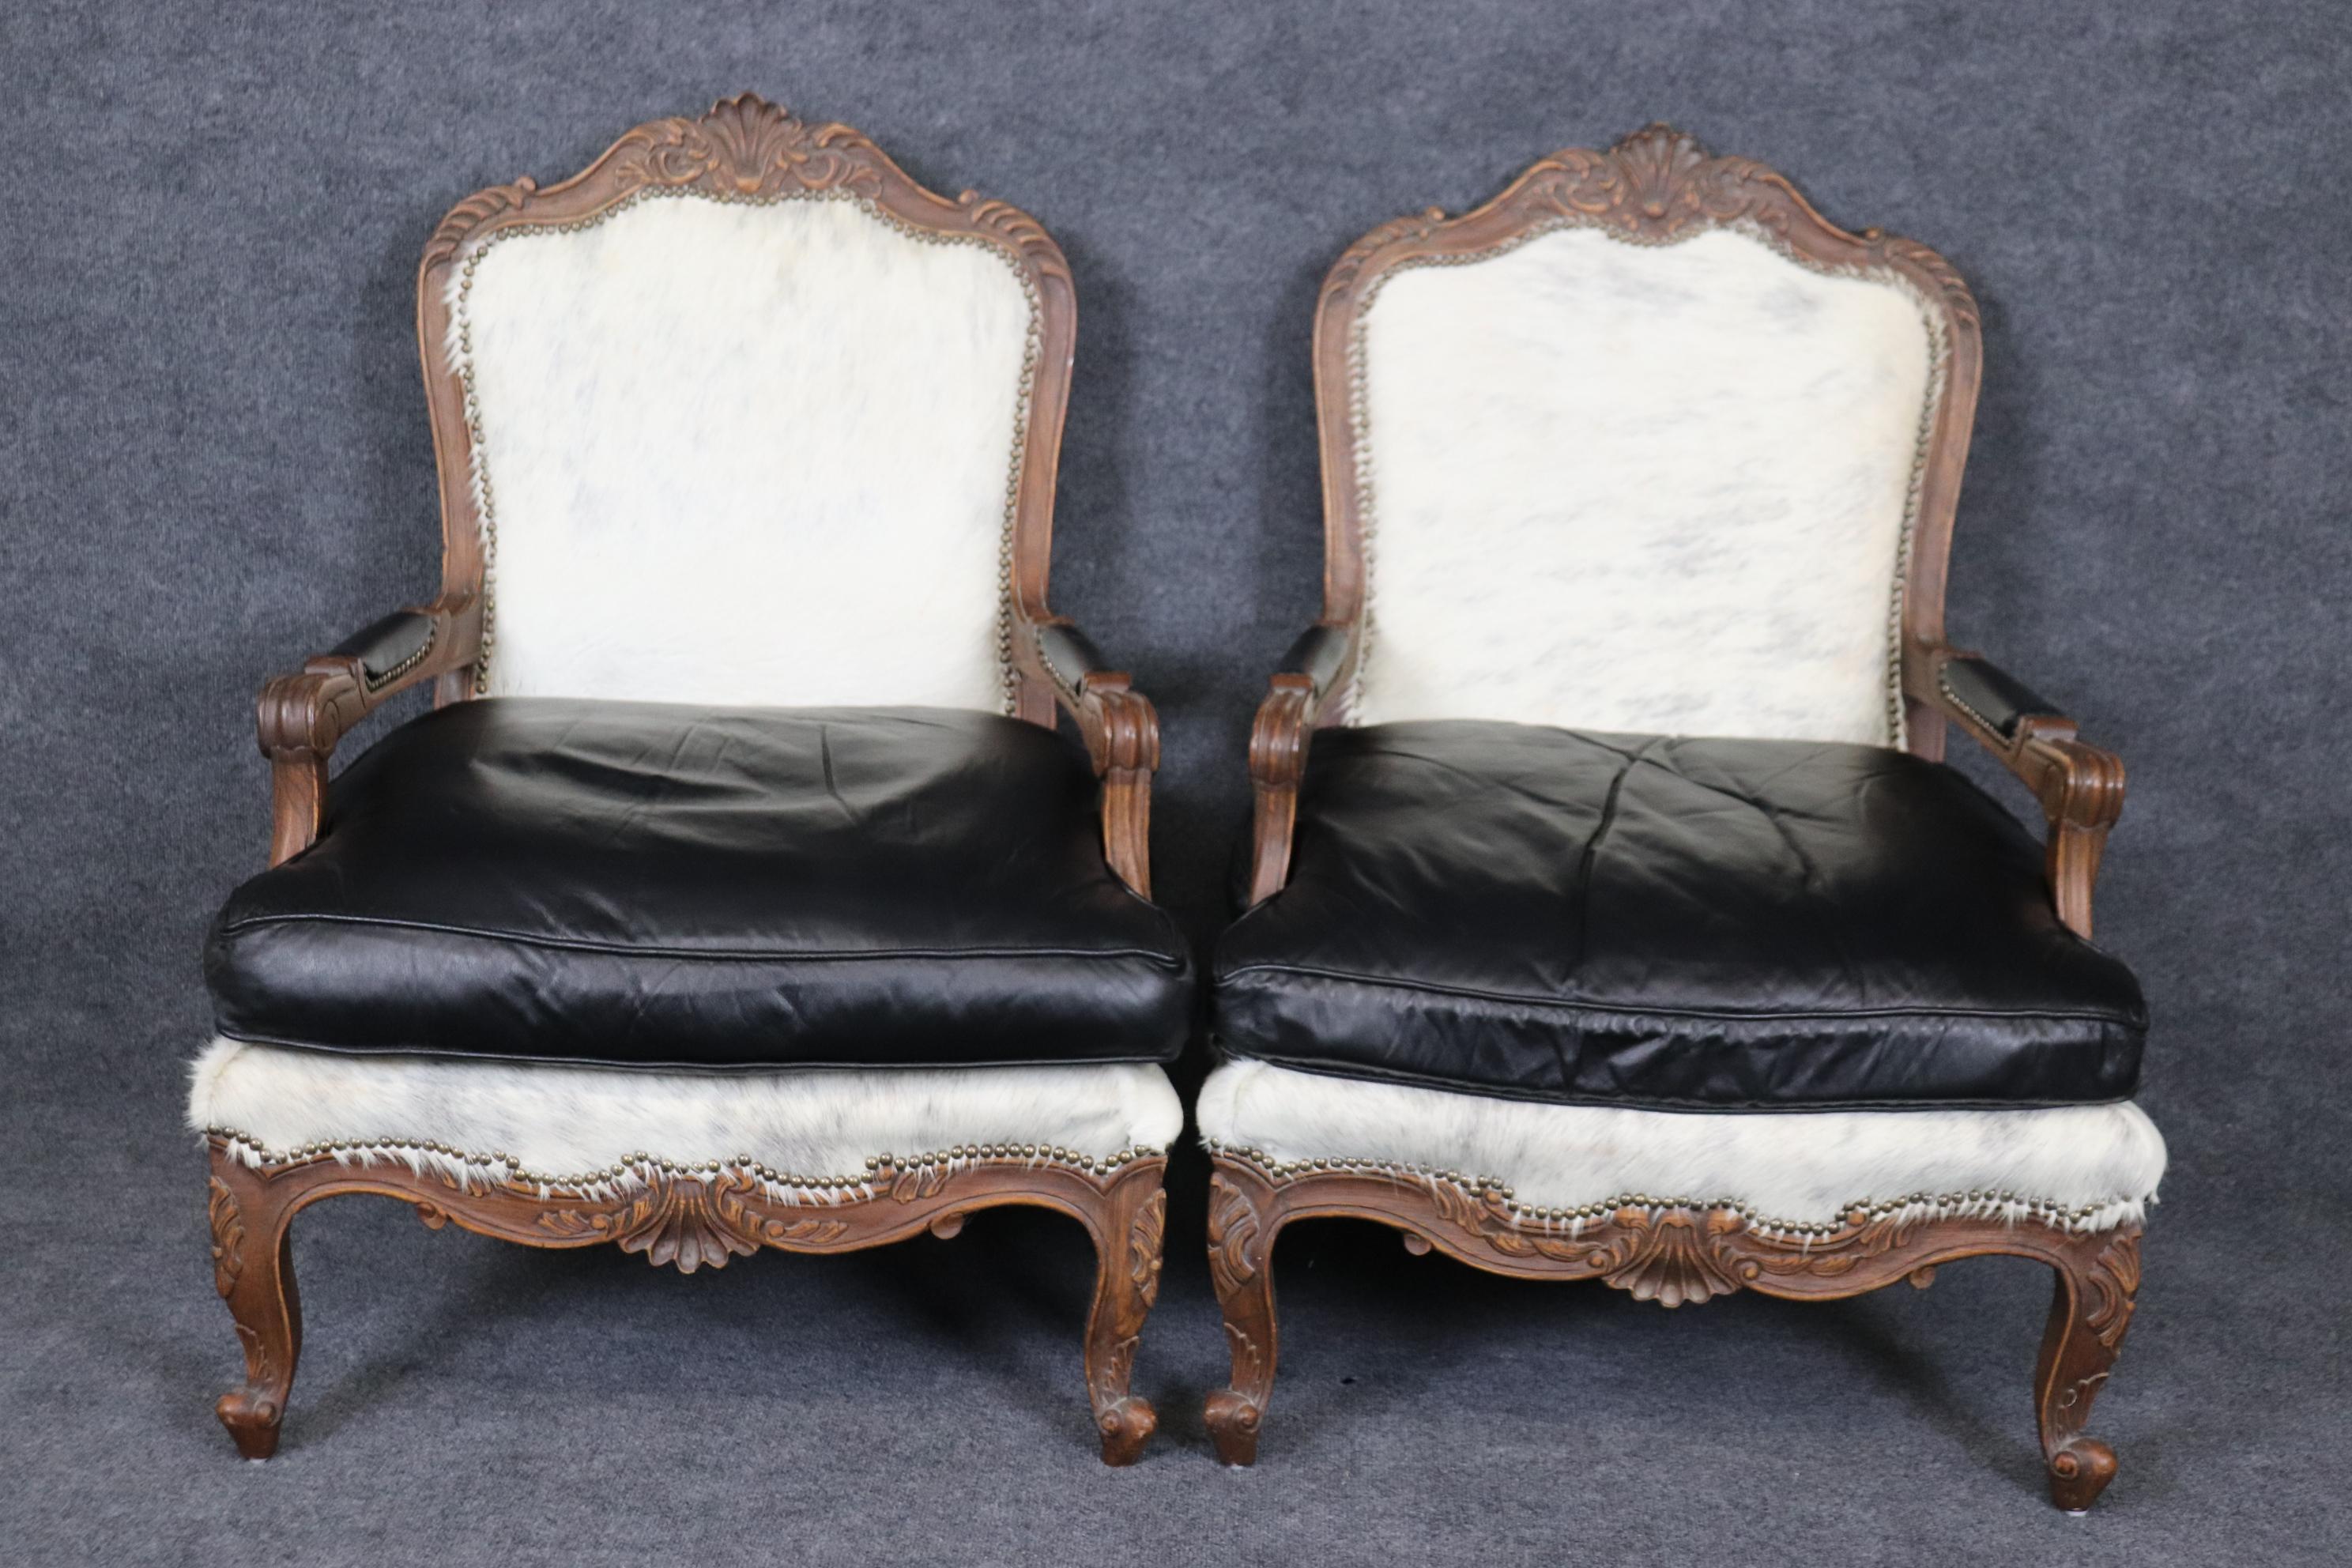 This is a superb and extremely expensive custom-made pair of 1940s era French Louis XV or Country French open arm bergere chairs. They are upholstered in natural cowhide and natural black leather. The chairs are in very good original condition and